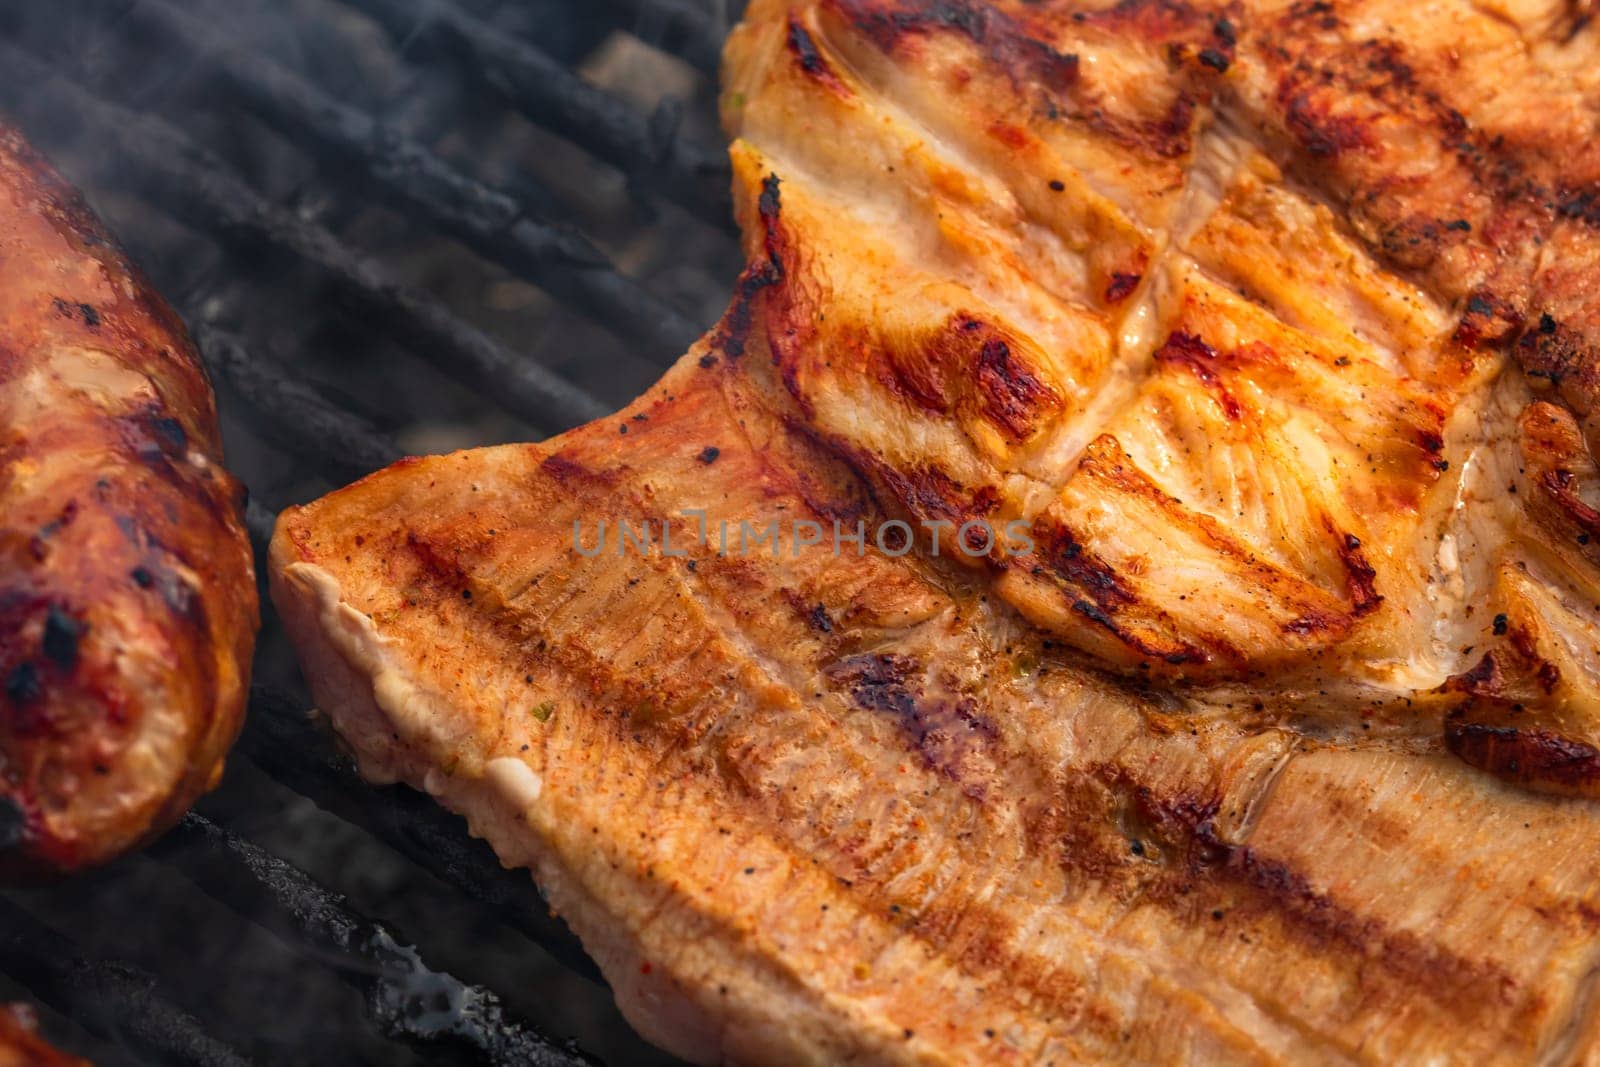 Close up on details of homemade chicken steak on barbecue grill. Barbecue, grill and food concept.